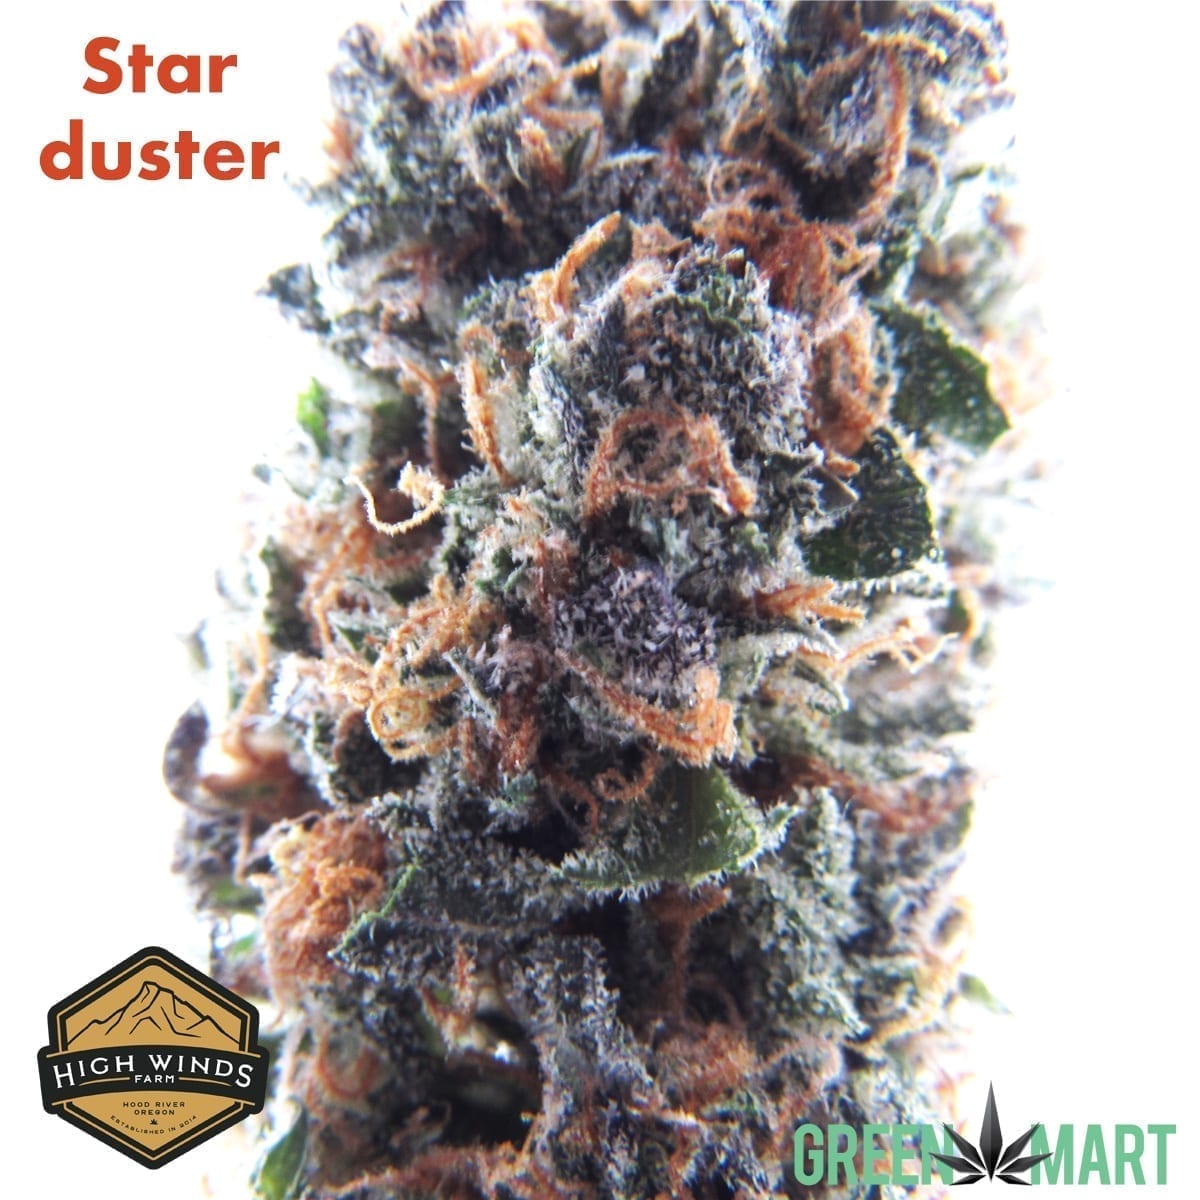 Starduster by High Winds Farm